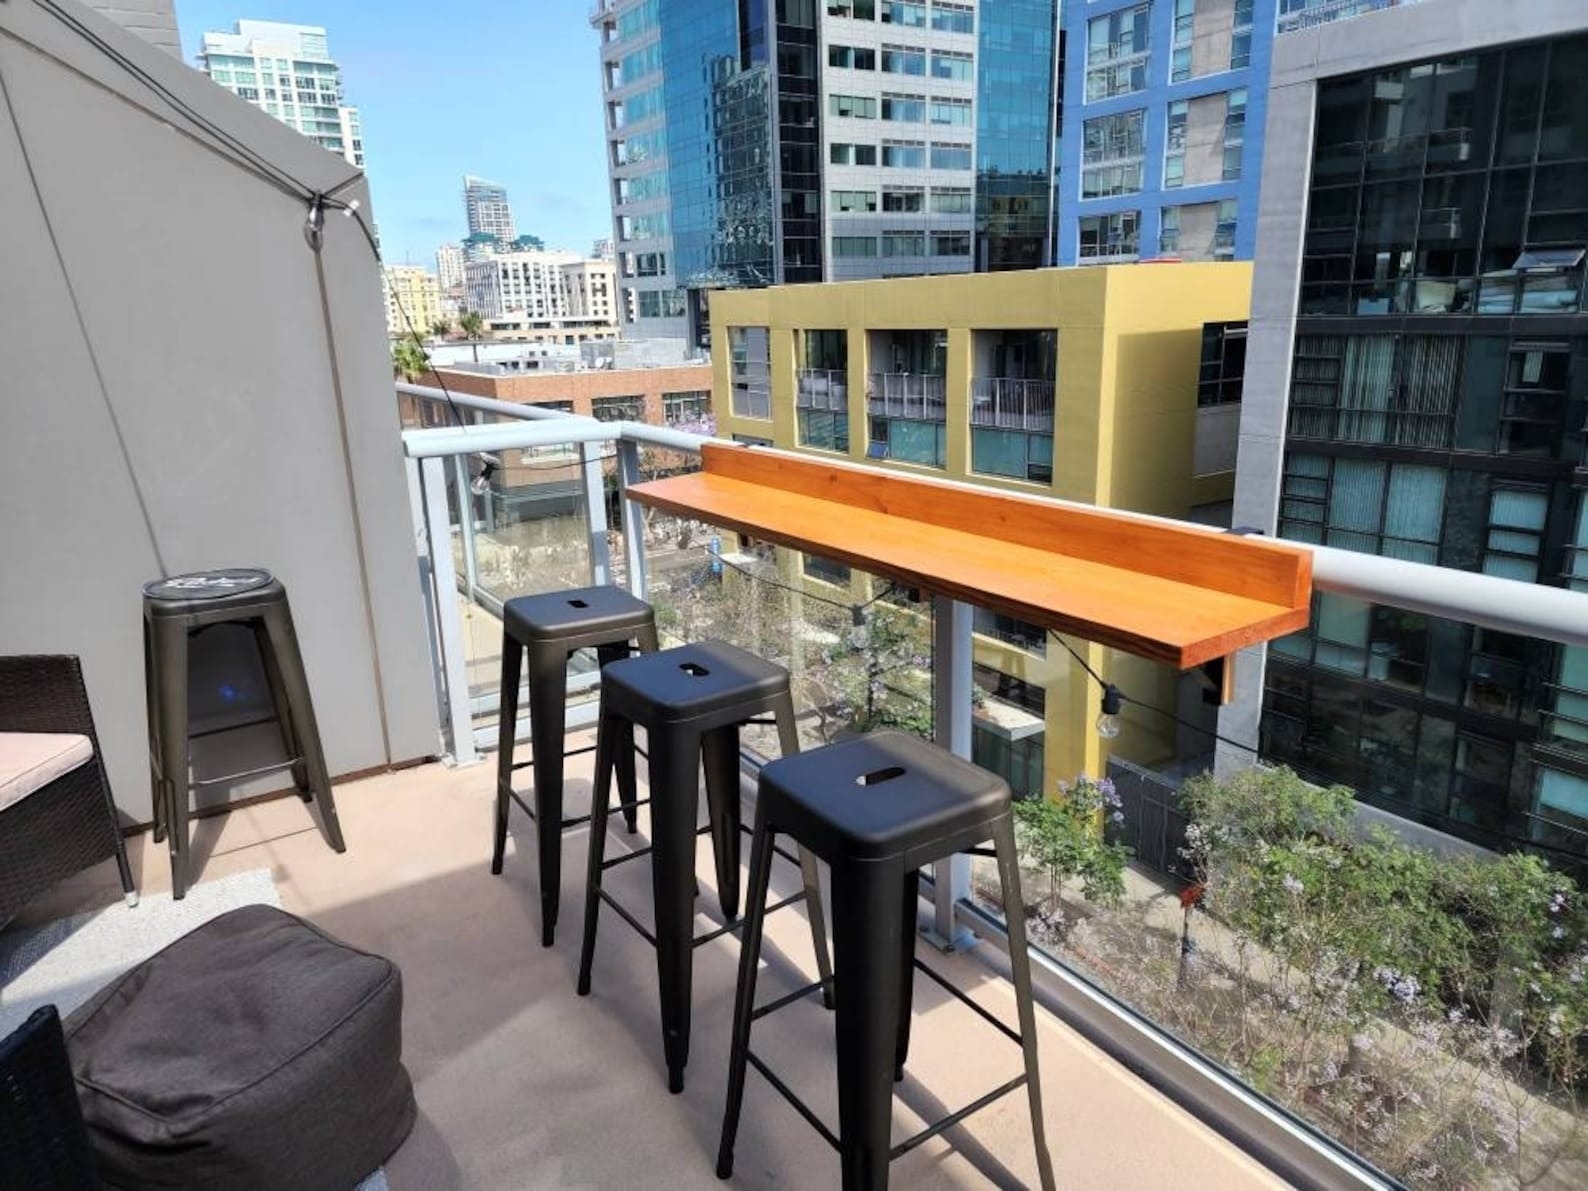 Balcony with a high wooden bar table and stools with urban backdrop, ideal for outdoor shopping inspiration